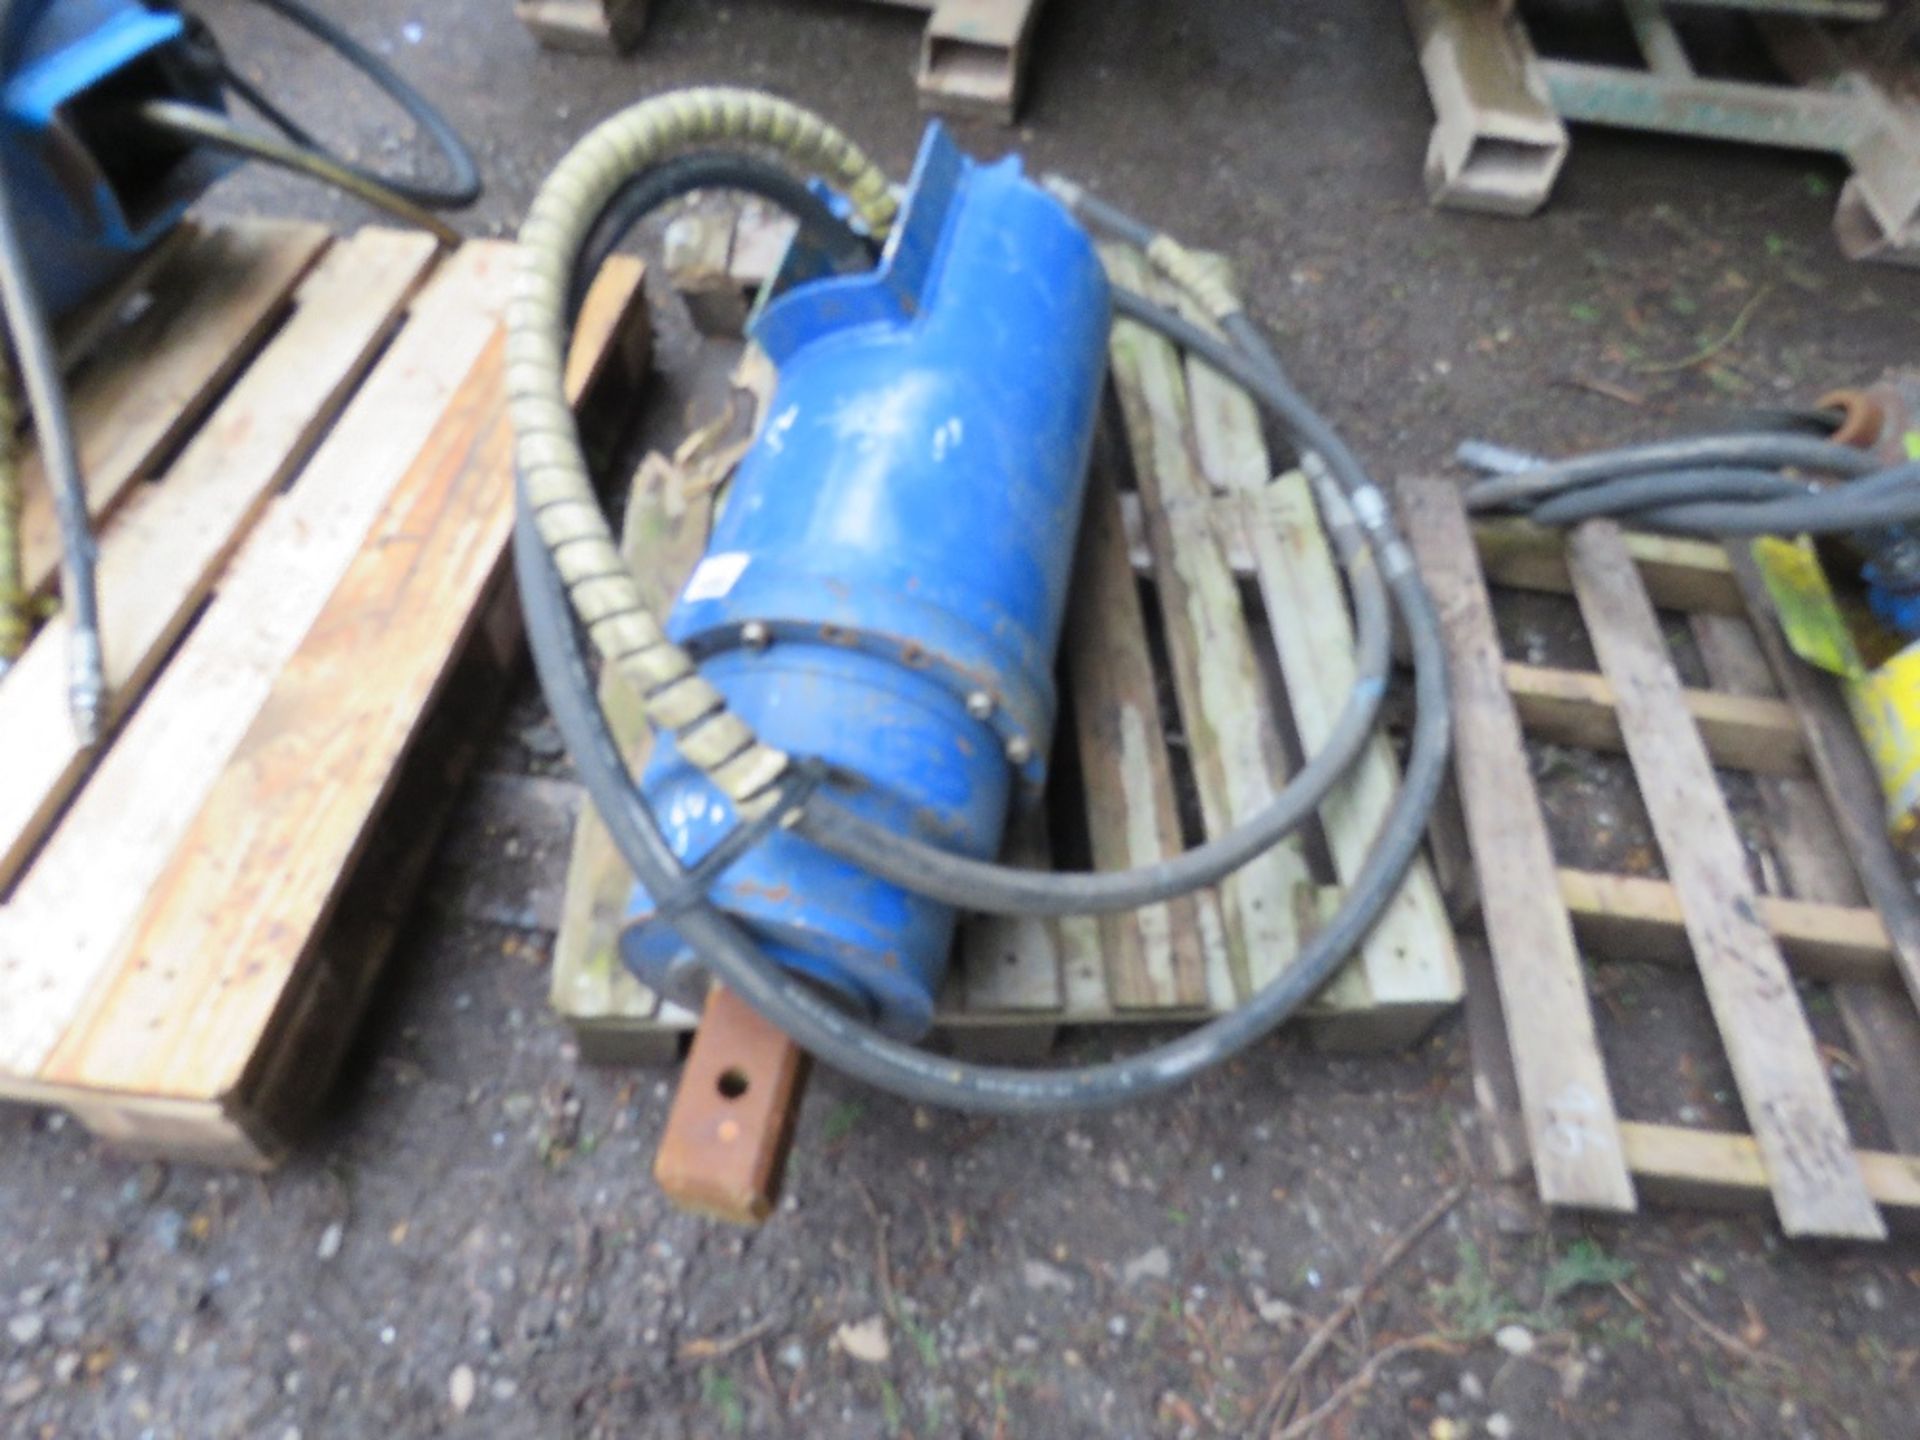 LARGE SIZED AUGER DRIVE HEAD FOR EXCAVATOR WITH 75MM SQUARE DRIVE SHAFT. - Image 2 of 3